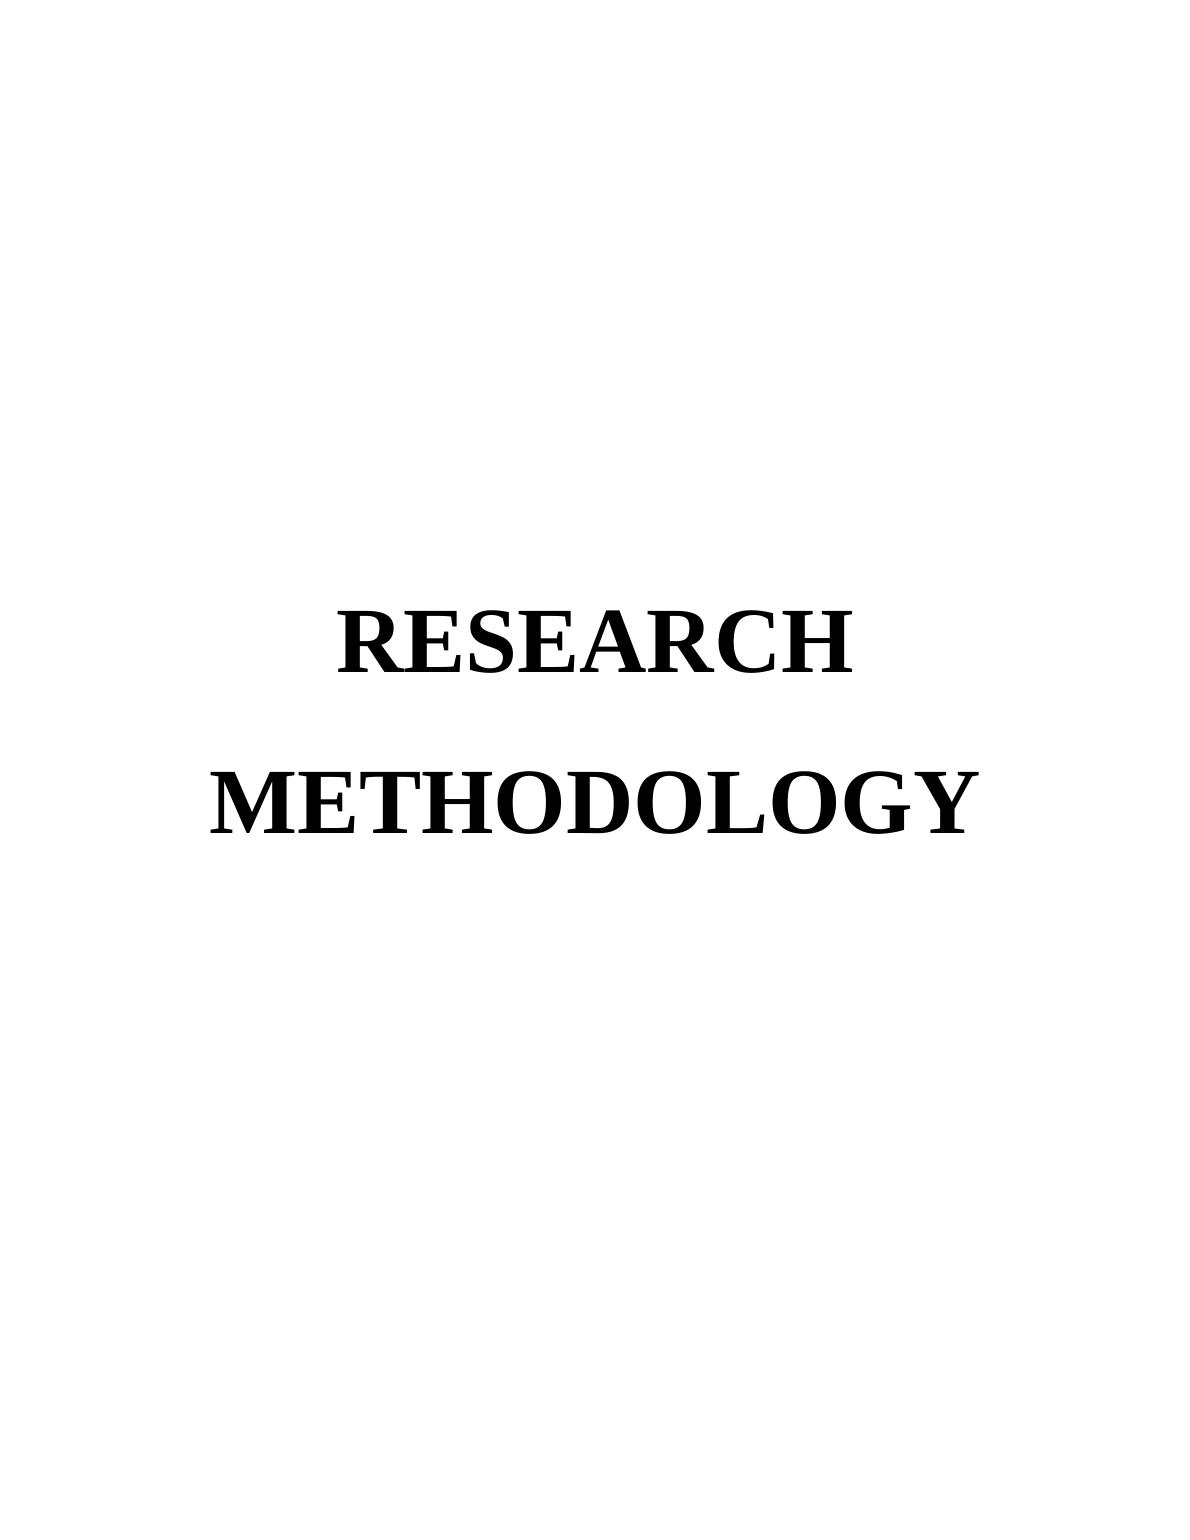 Research Methodology on History of Breast Cancer_1